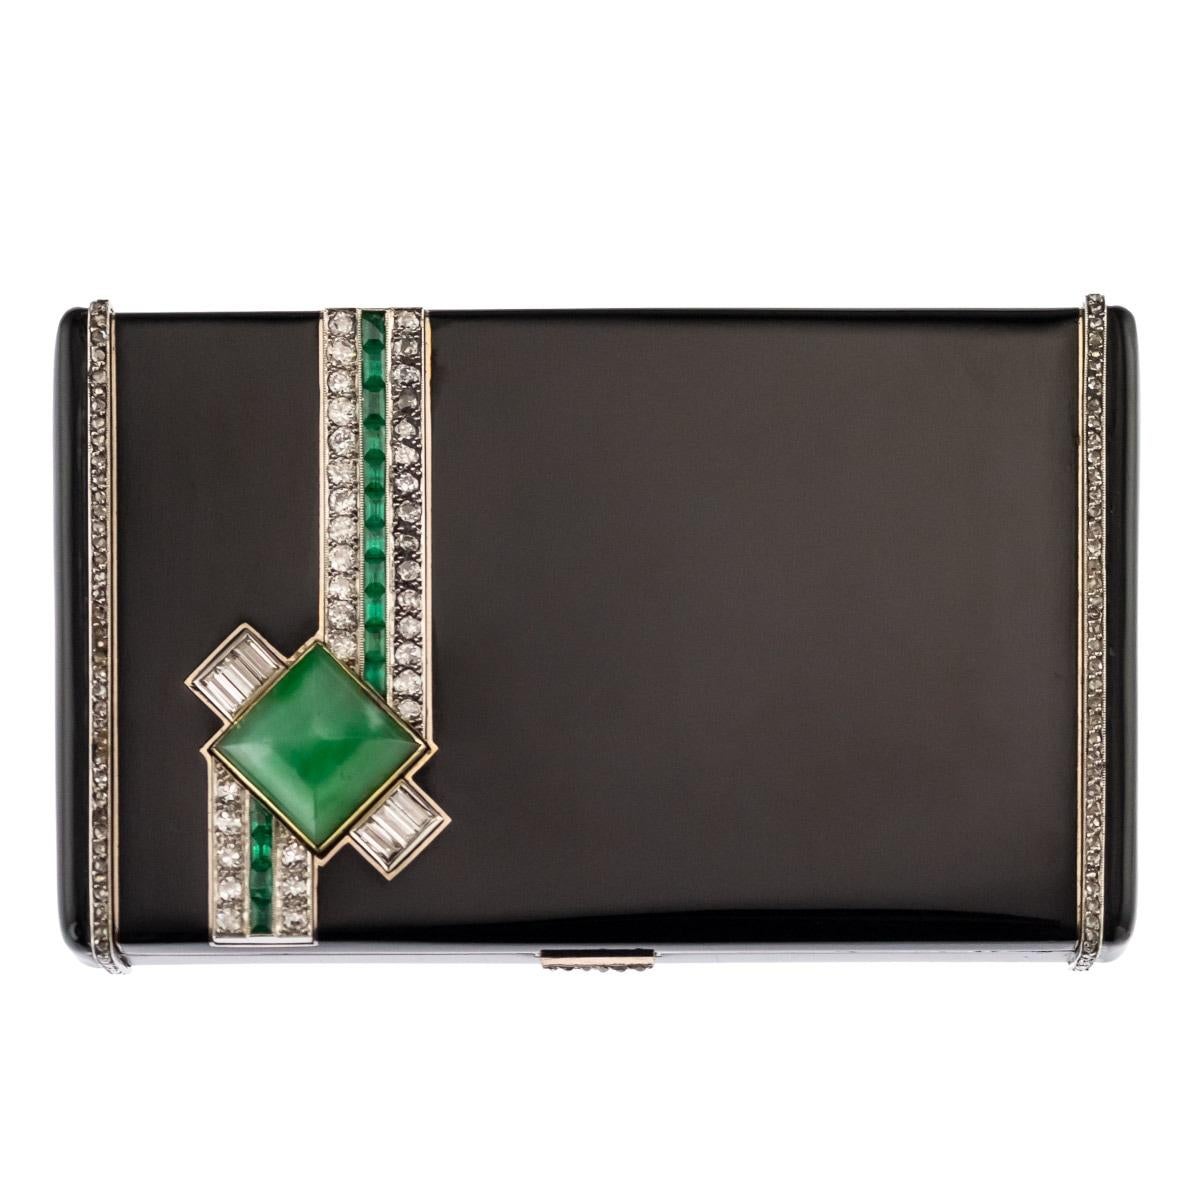 Antique early-20th century French Art Deco 18-karat gold vanity case, of rectangular form with rounded corners, the lid set with a pyramid shaped jade, rows of diamonds and emeralds, set in platinum, the whole box is applied with black lacquer. The